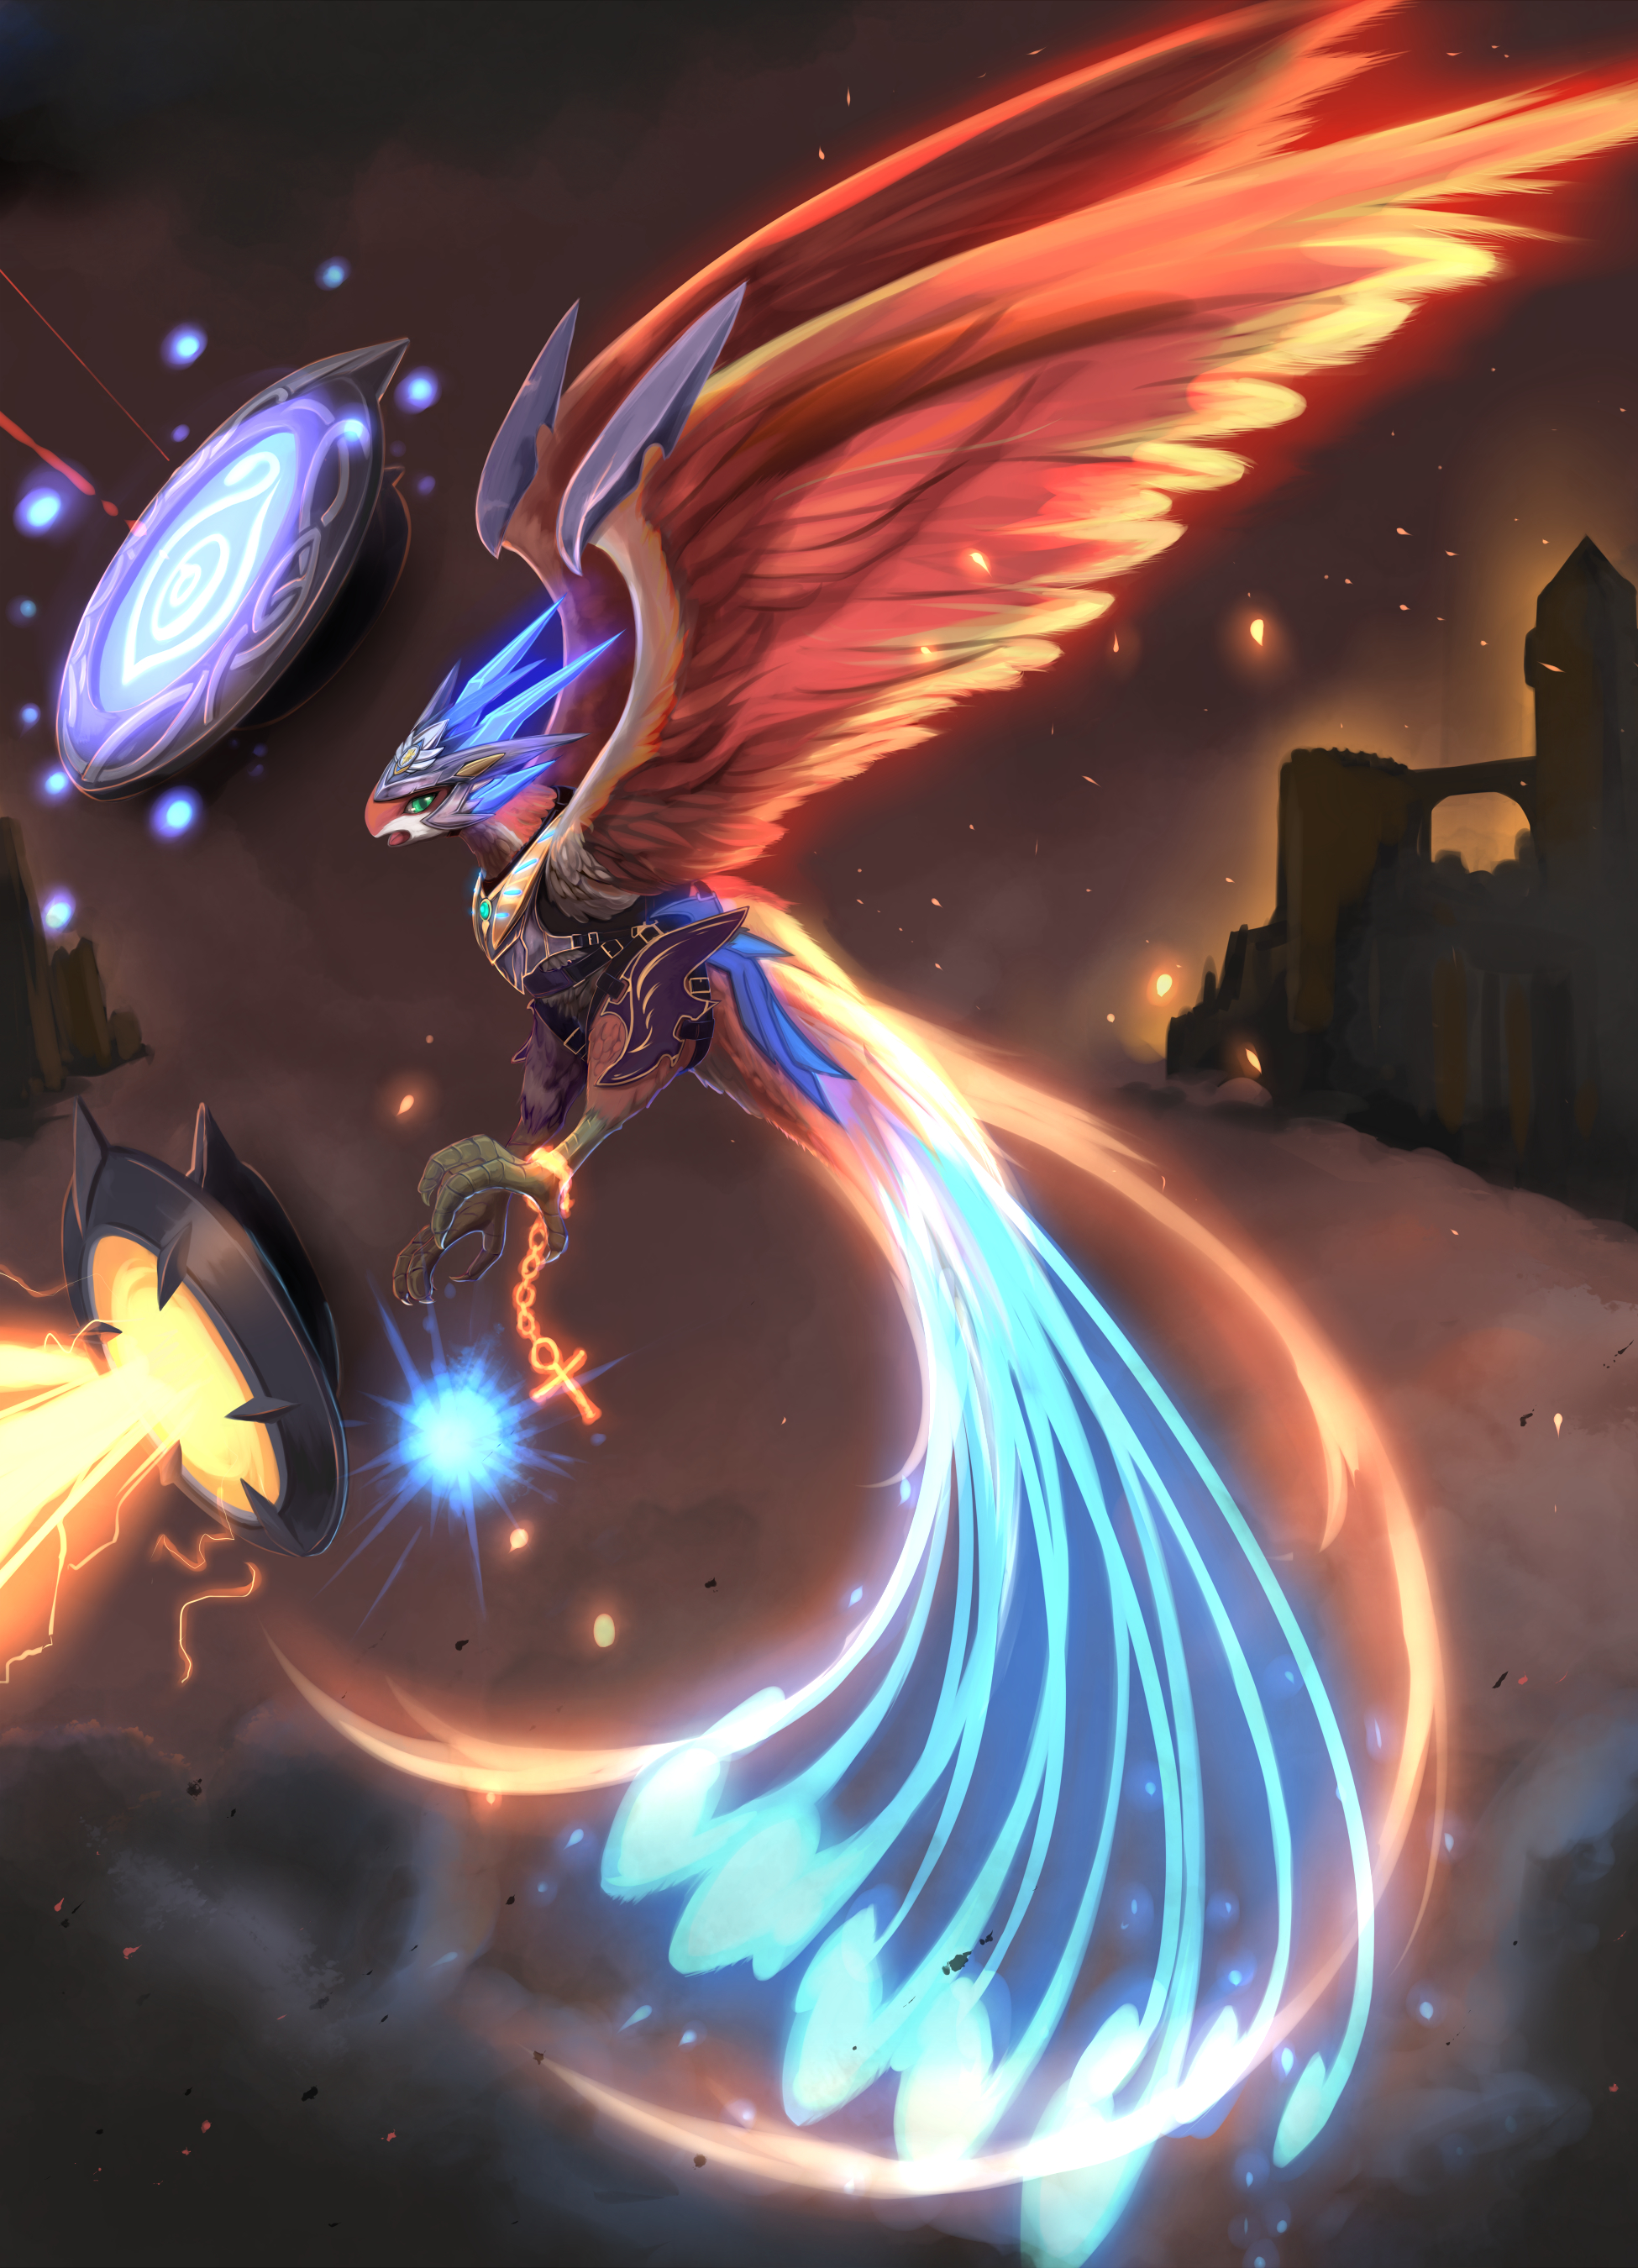 puzzle and dragons wallpaper,cg artwork,fictional character,dragon,space,mythical creature